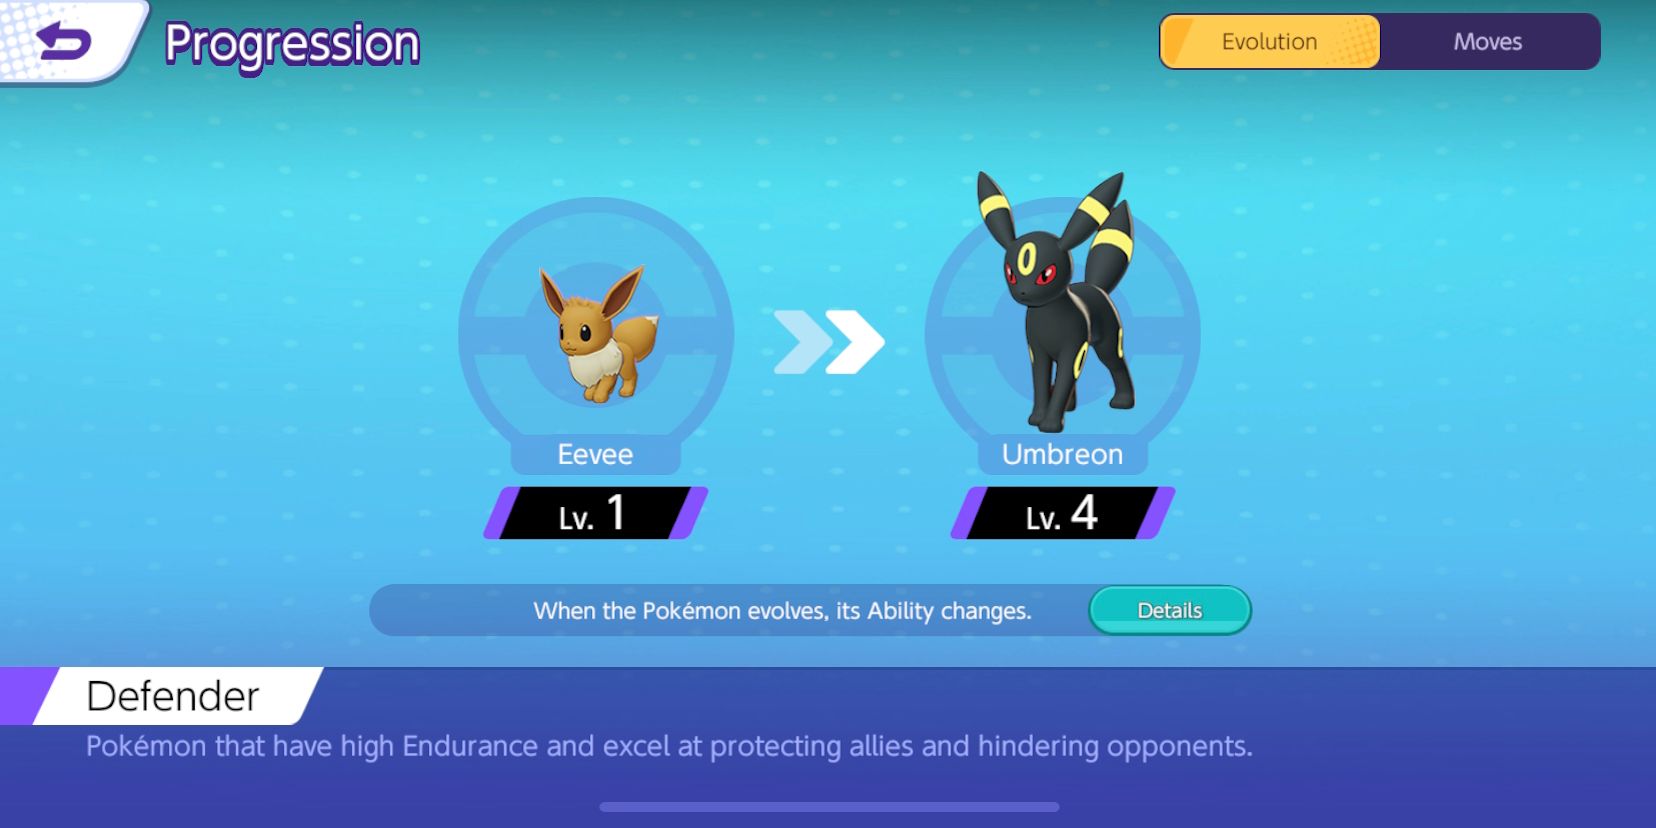 Pokemon Unite's Umbreon Progression Screen, showing at what level it evolves from Eevee